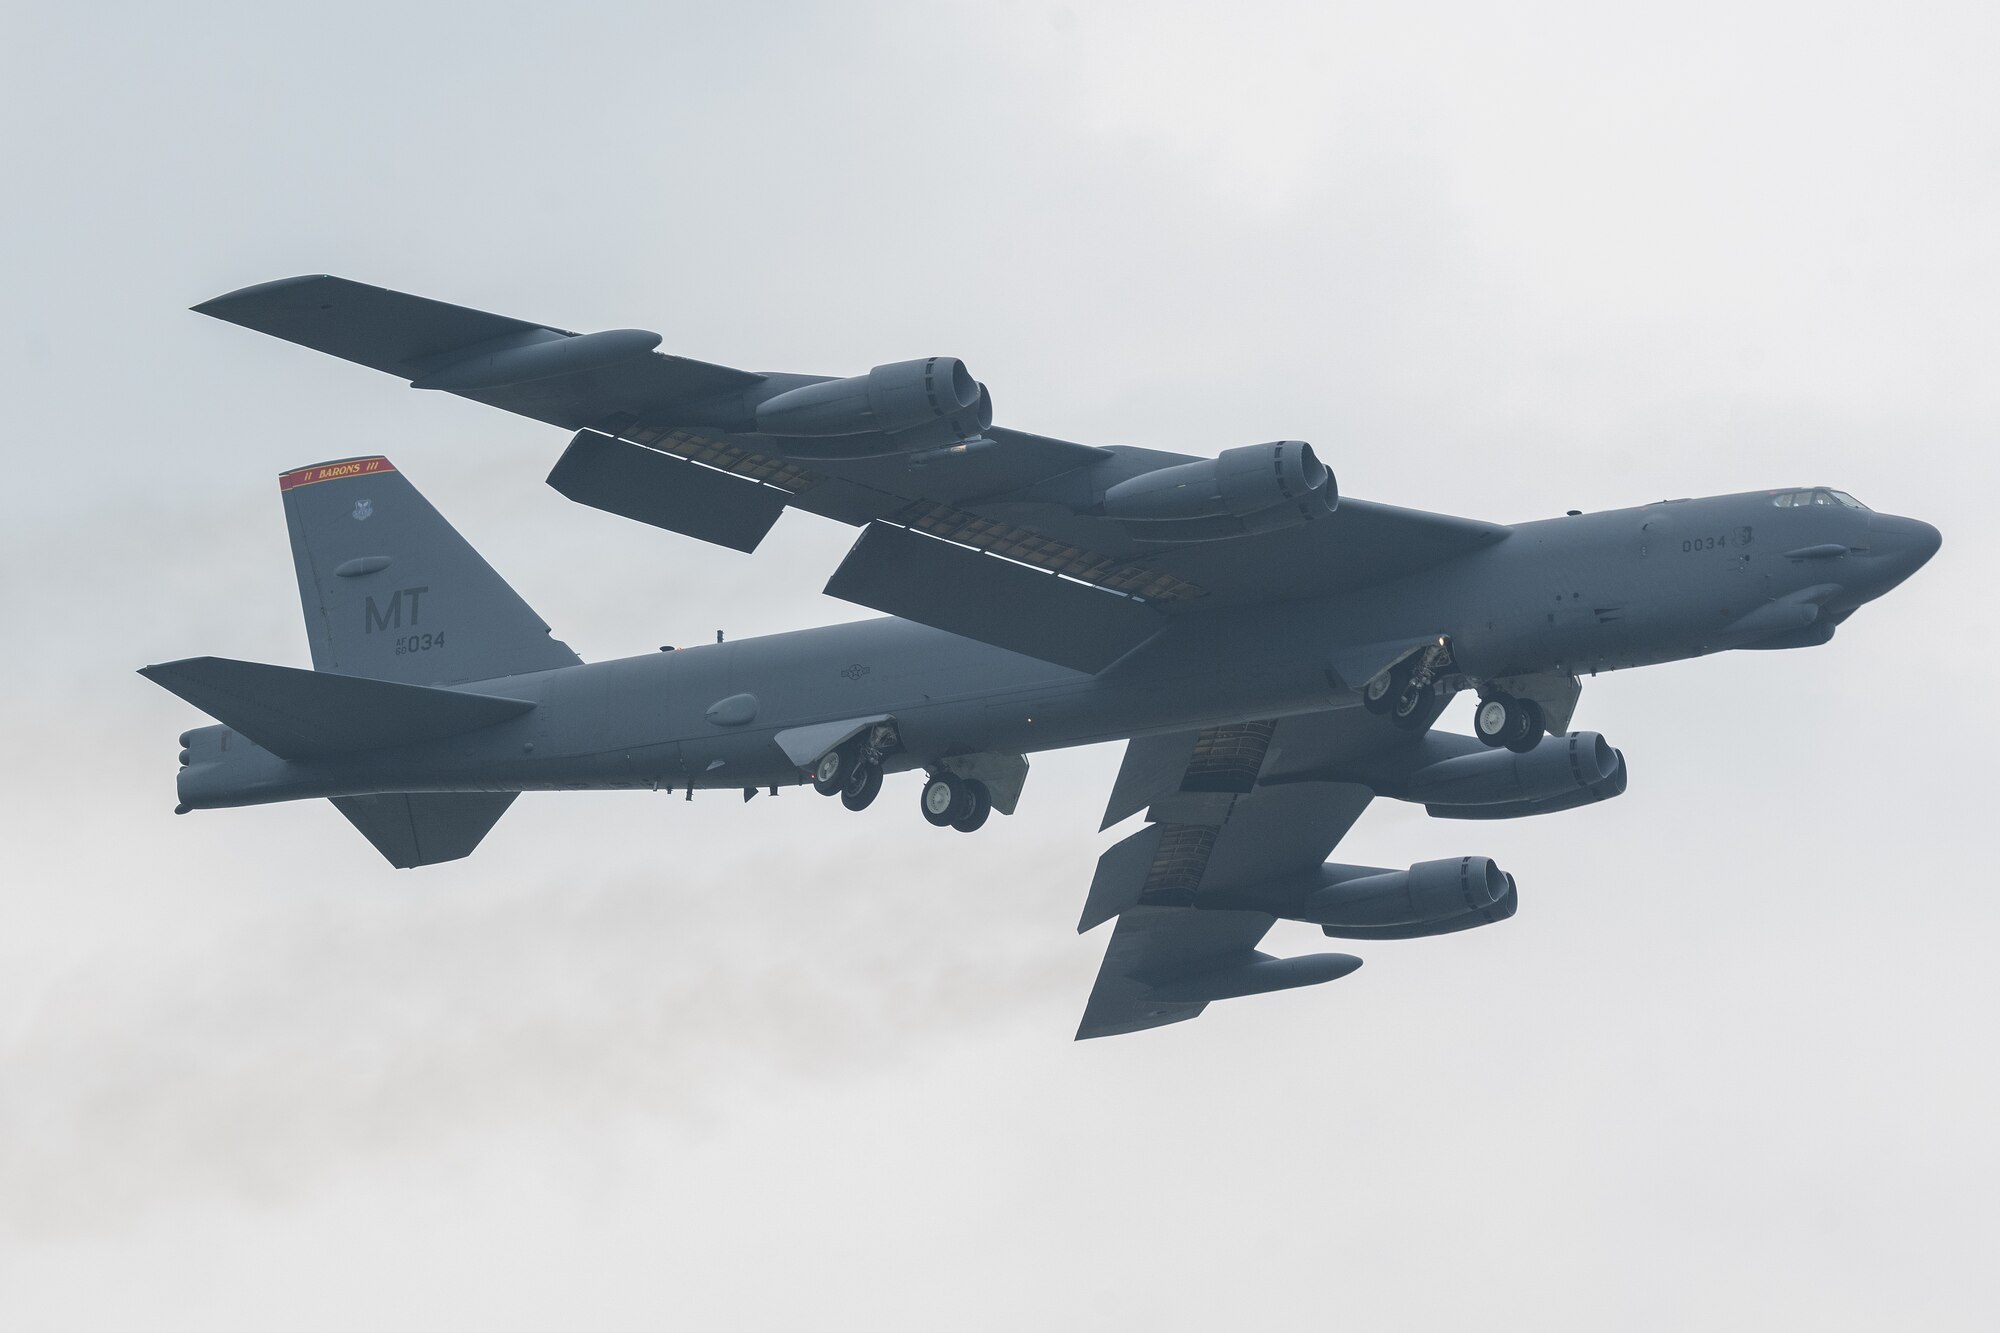 A U.S. Air Force B-52H Stratofortress assigned to the 23rd Bomb Squadron at Minot Air Force Base, North Dakota, takes off in support of a bilateral military training exercise at the Kualanamu International Airport in Medan, Indonesia, June 21, 2023. Bomber deployments and operations like this provide opportunities to train and work with allies and partners in joint and combined operations and exercises. This particular training flight marked the first time a U.S. Air Force B-52 had taken off from Indonesian soil. (U.S. Air Force photo by Tech. Sgt. Zade Vadnais)